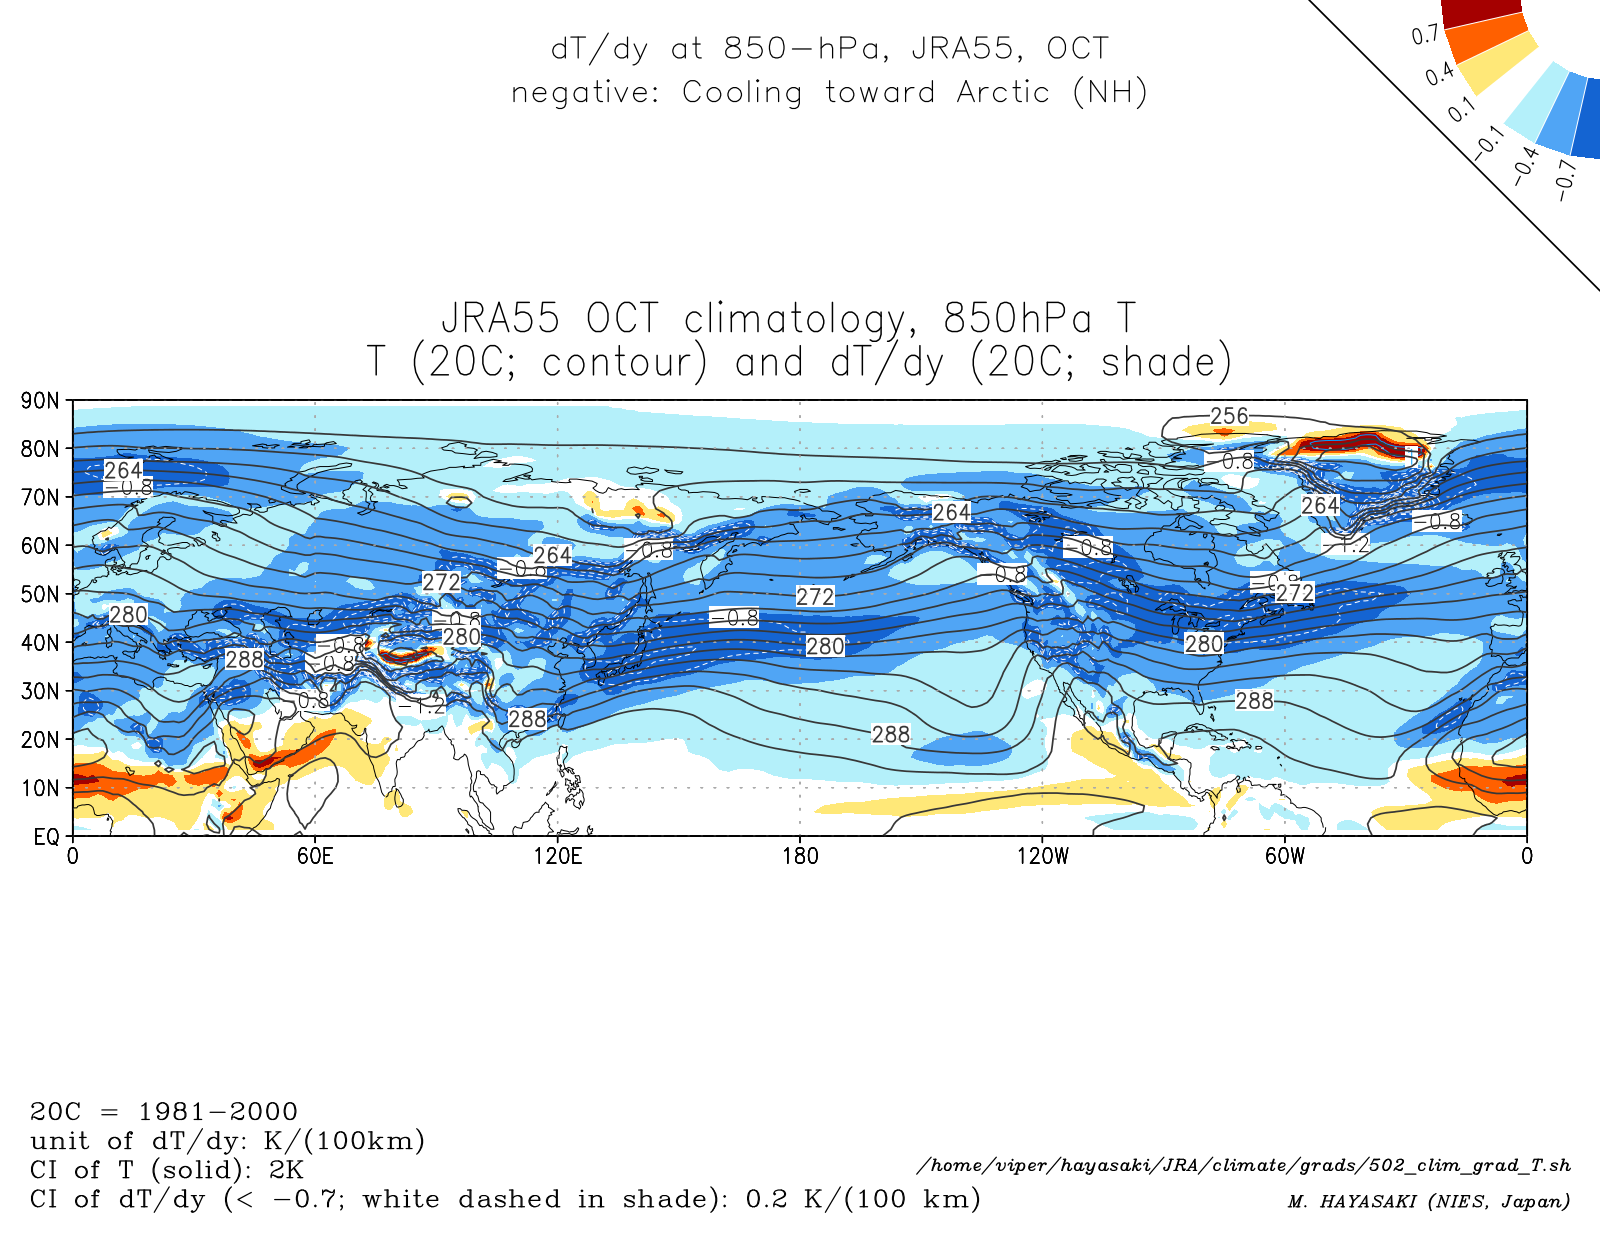 Monthly climatology (October) of dT/dy at 850-hPa in the NH